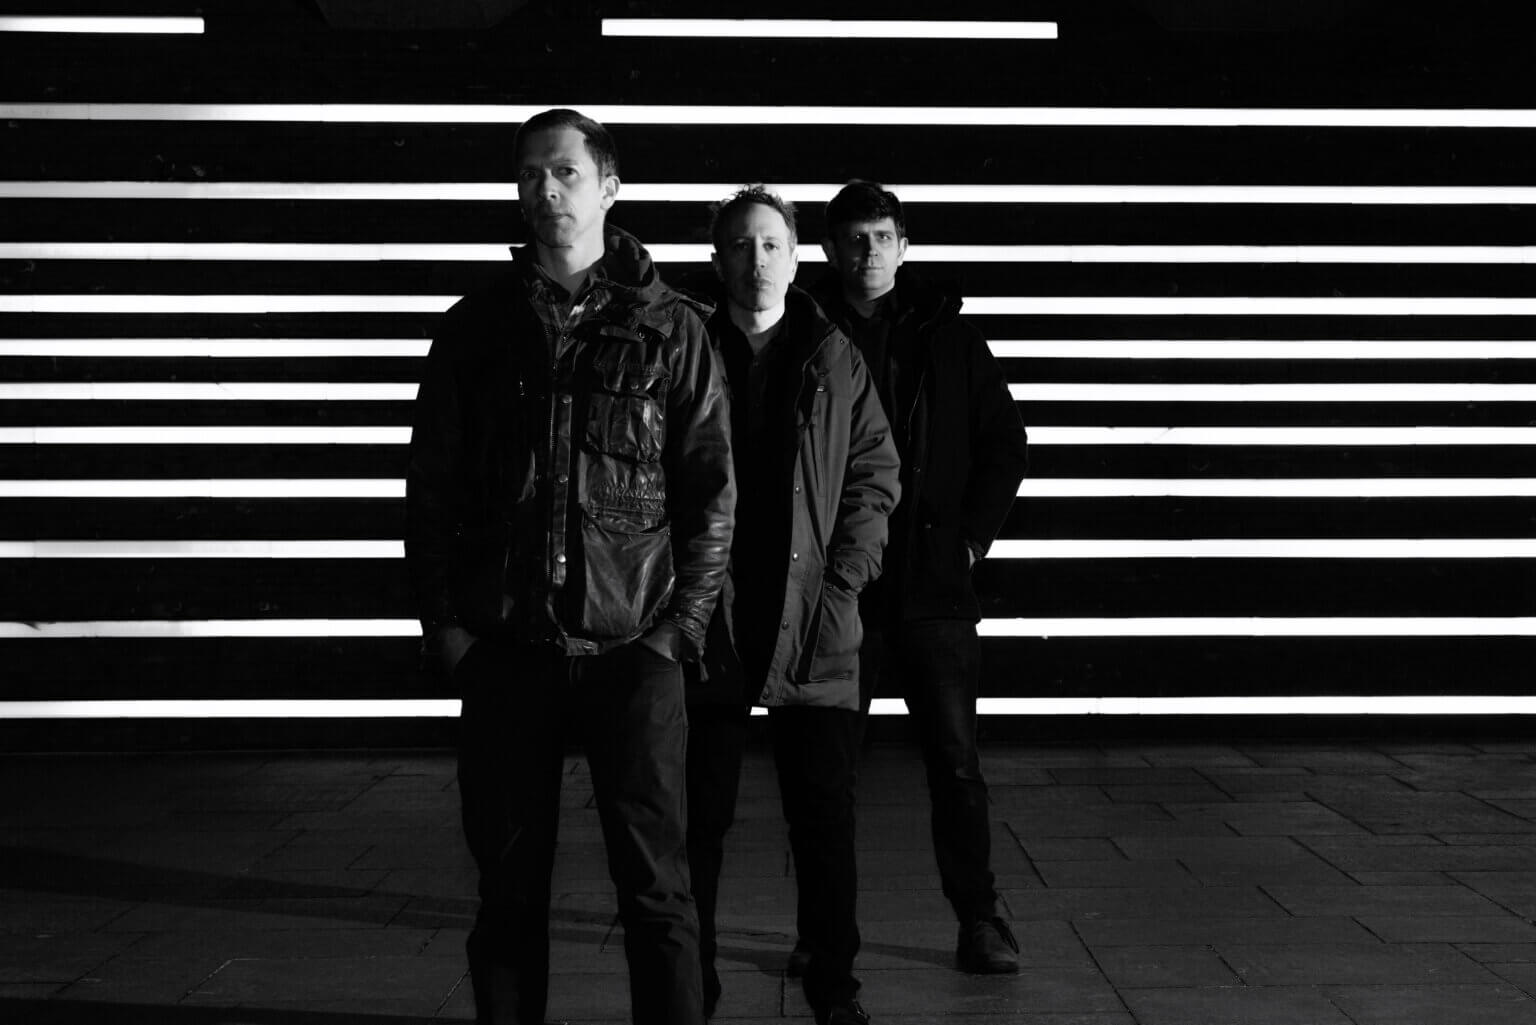 Skull Practitioners Drop "Exit Wounds" Video. The track is off the trio's forthcoming release Exit Wounds, out January 20, via In The Red